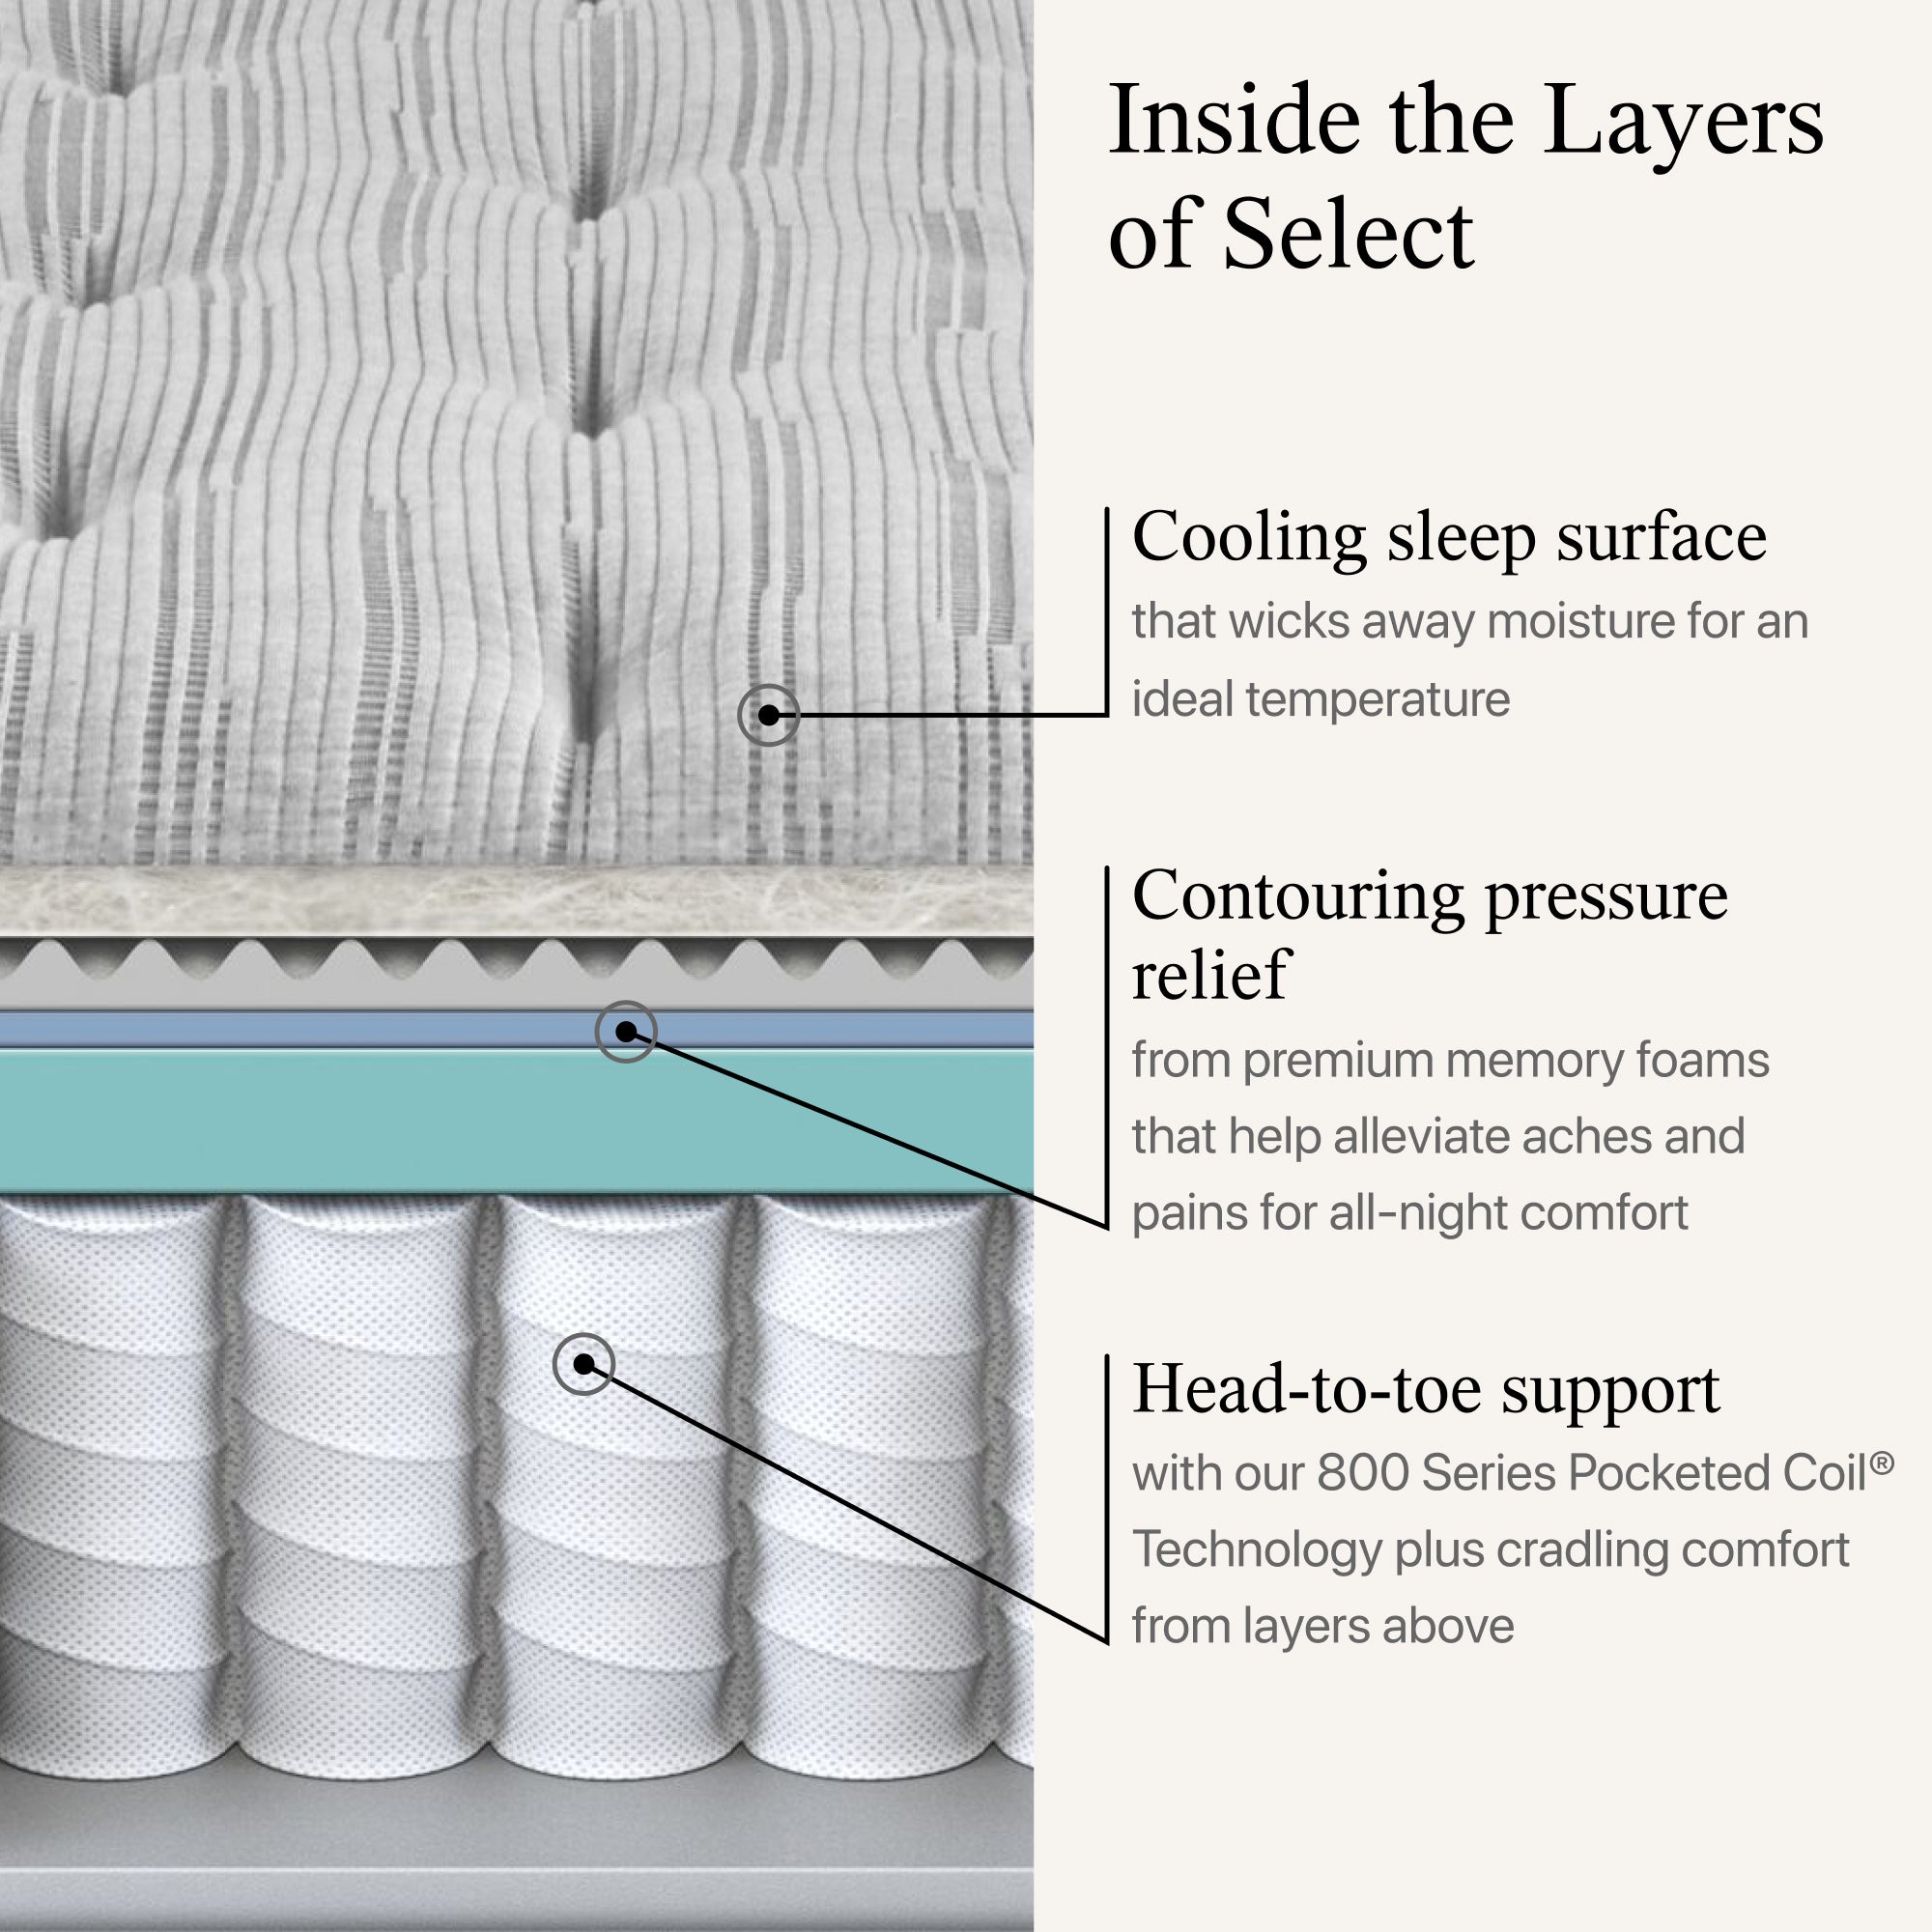 Diagram showing the materials used on the Beautyrest Select mattress ||feel: Plush